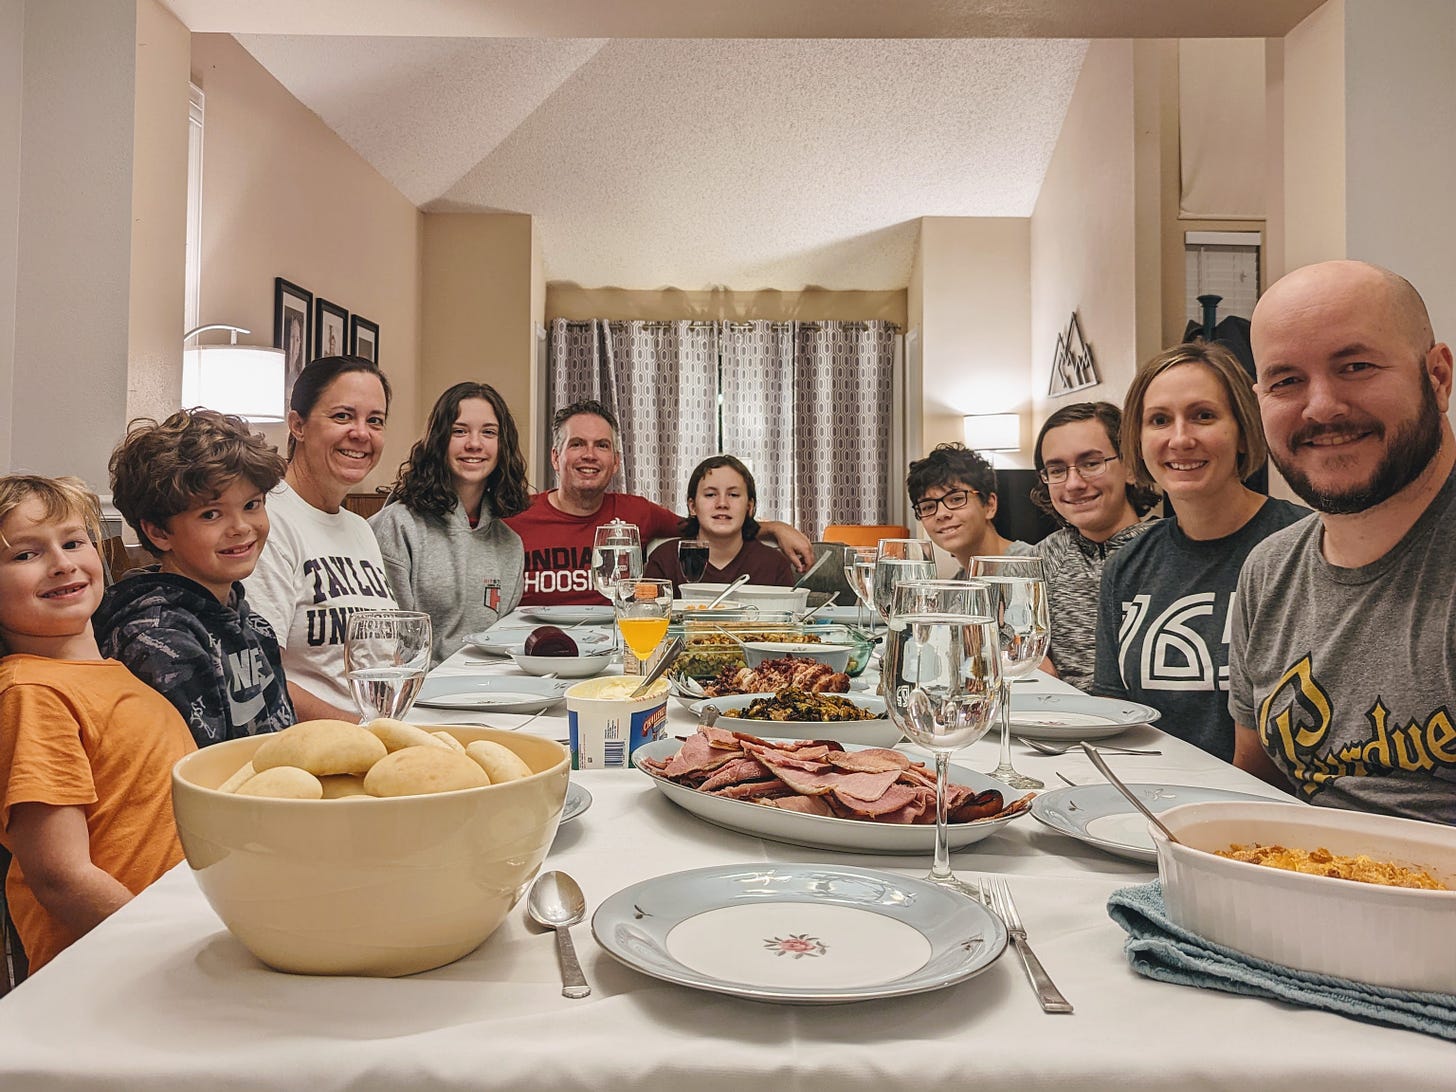 A table full of food is surrounded by 10 family members, smiling at the camera.